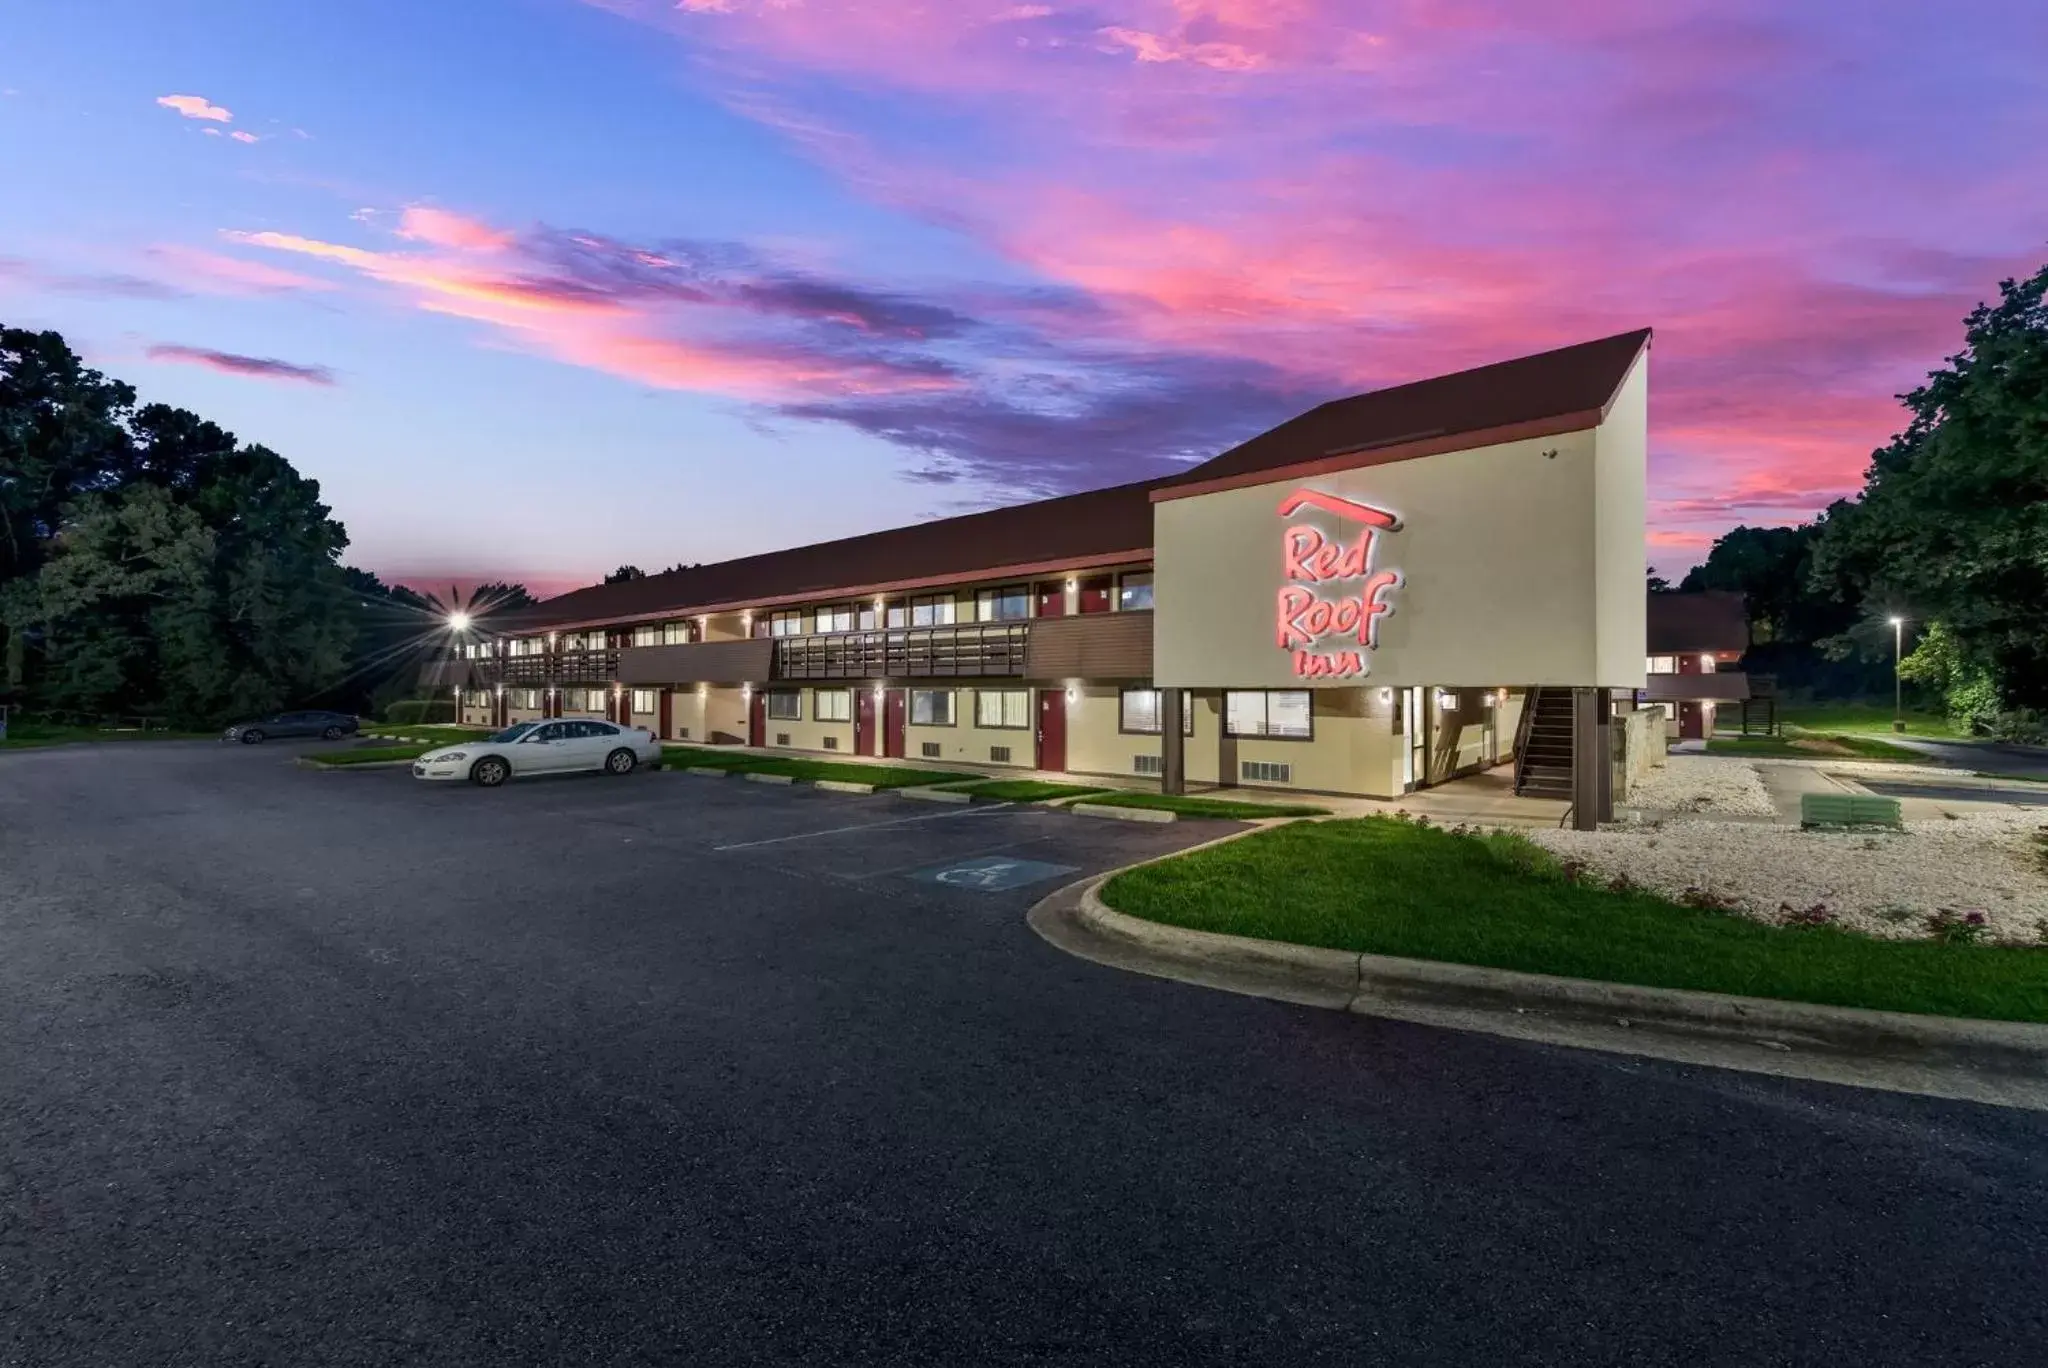 Property Building in Red Roof Inn Hickory